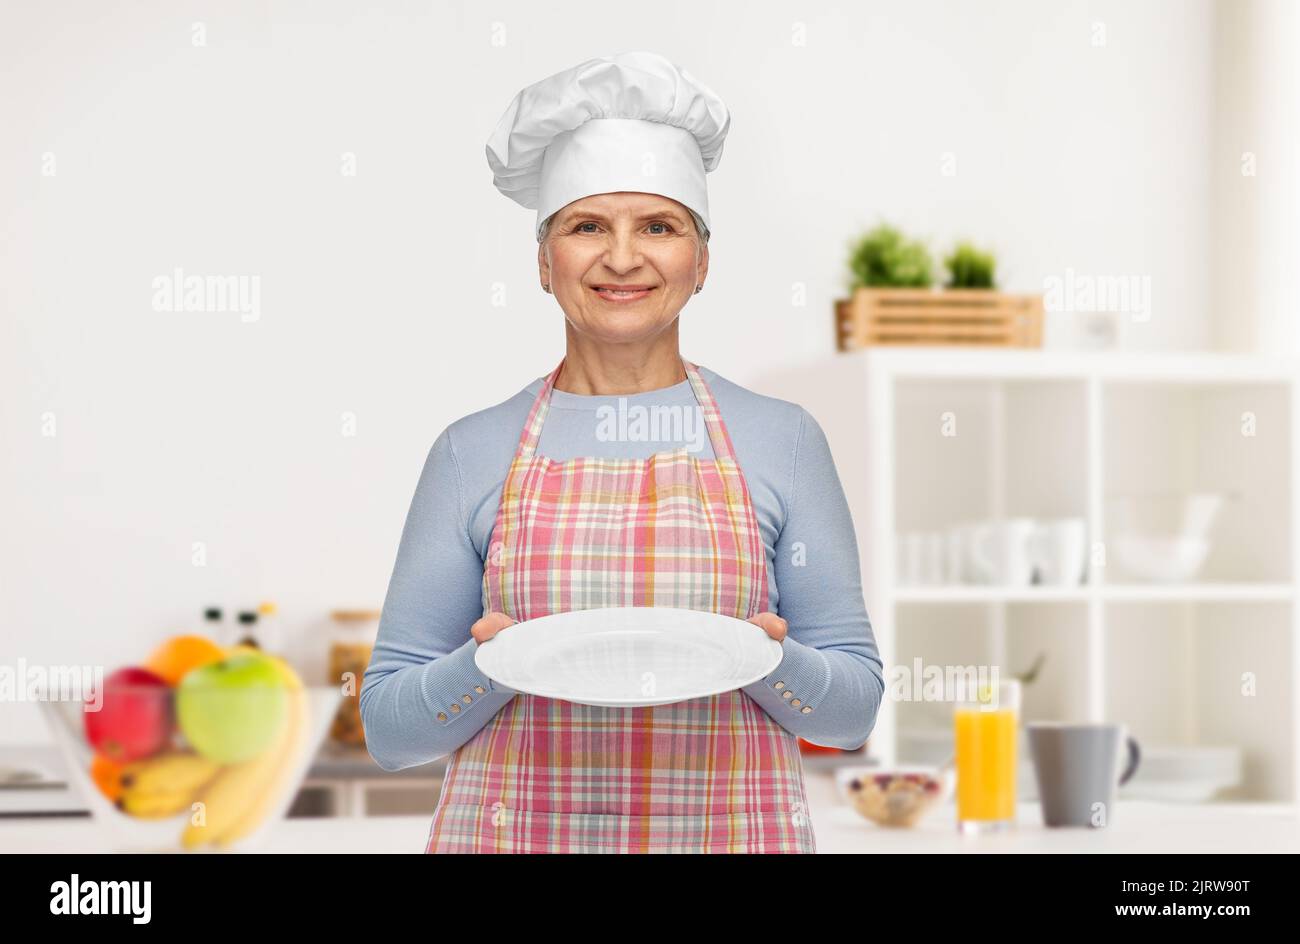 smiling senior woman or chef holding empty plate Stock Photo